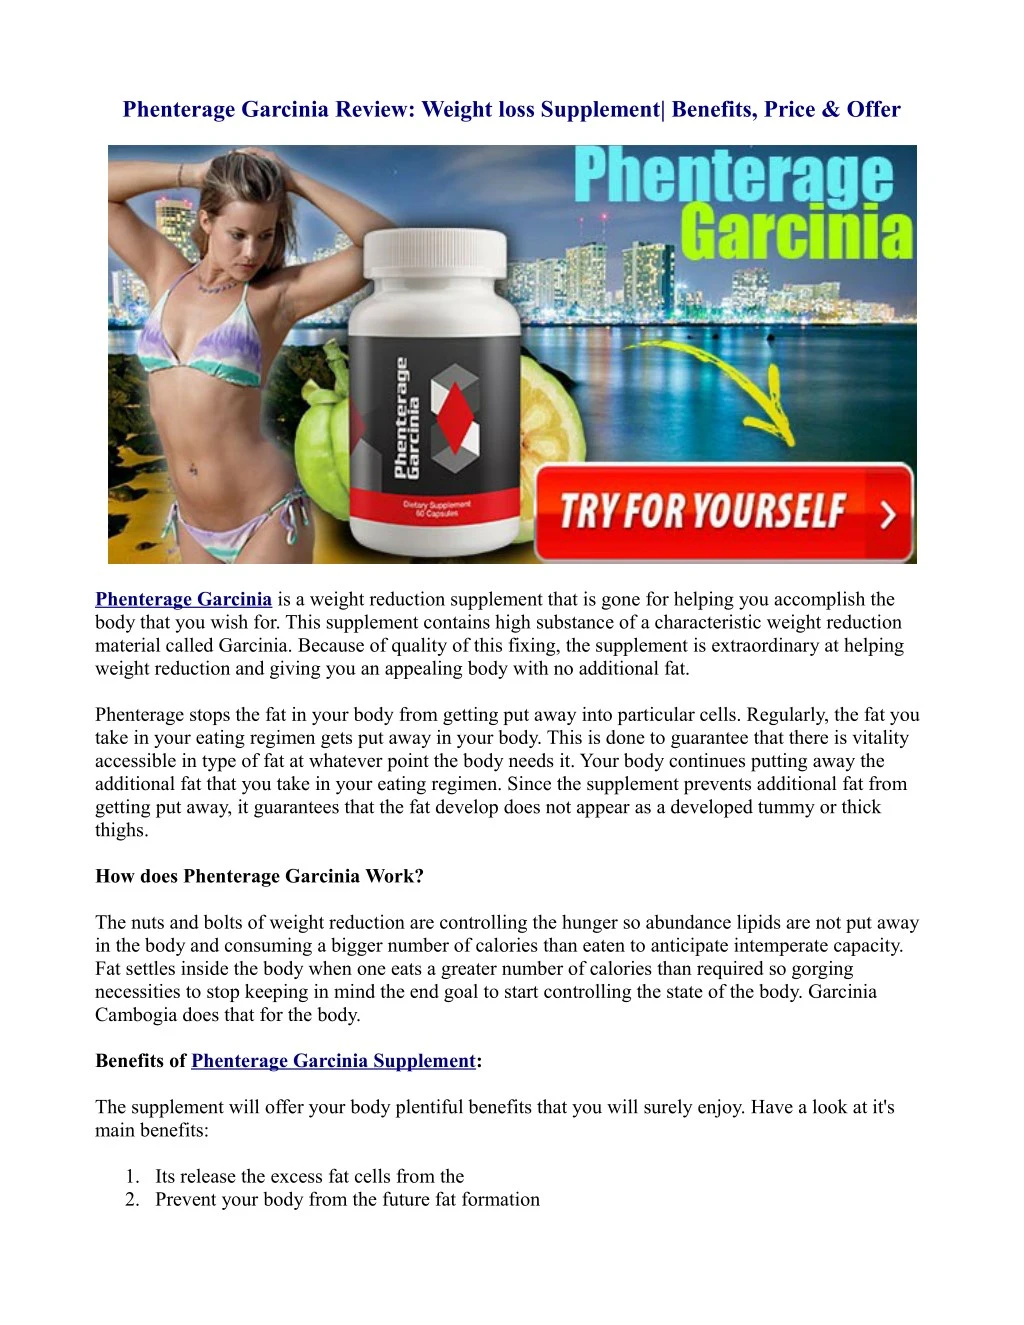 phenterage garcinia review weight loss supplement